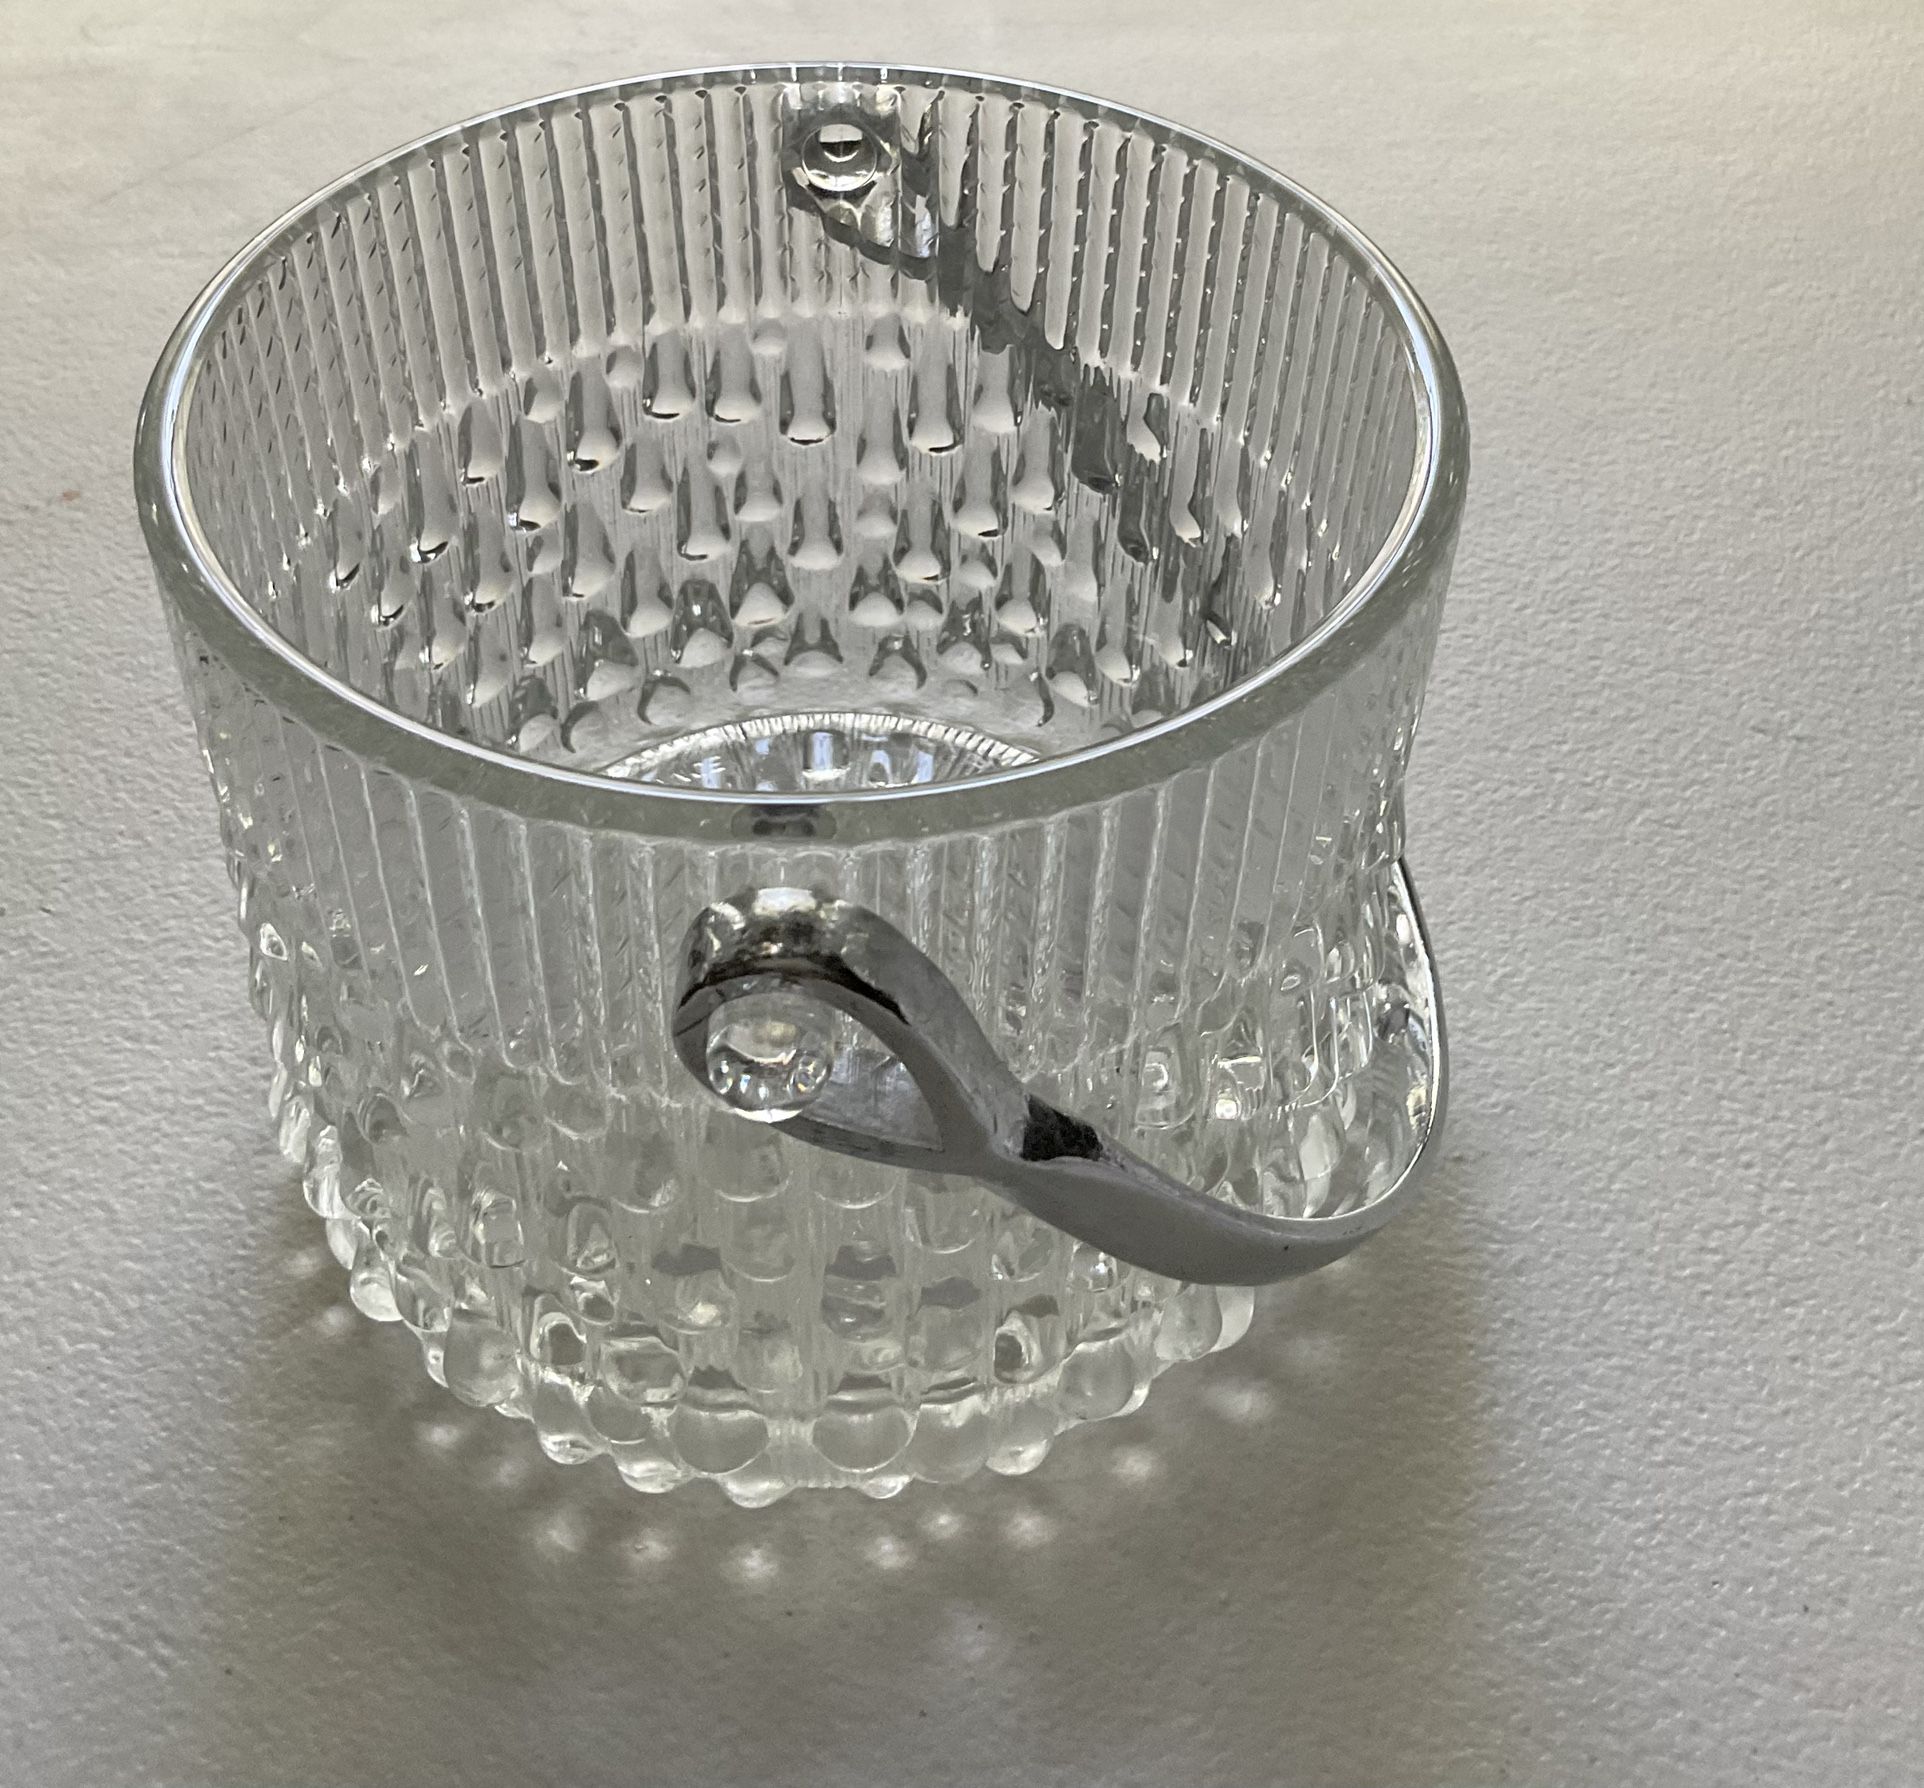 Ice bucket Glass 4” Tall Telfor Made In France $10